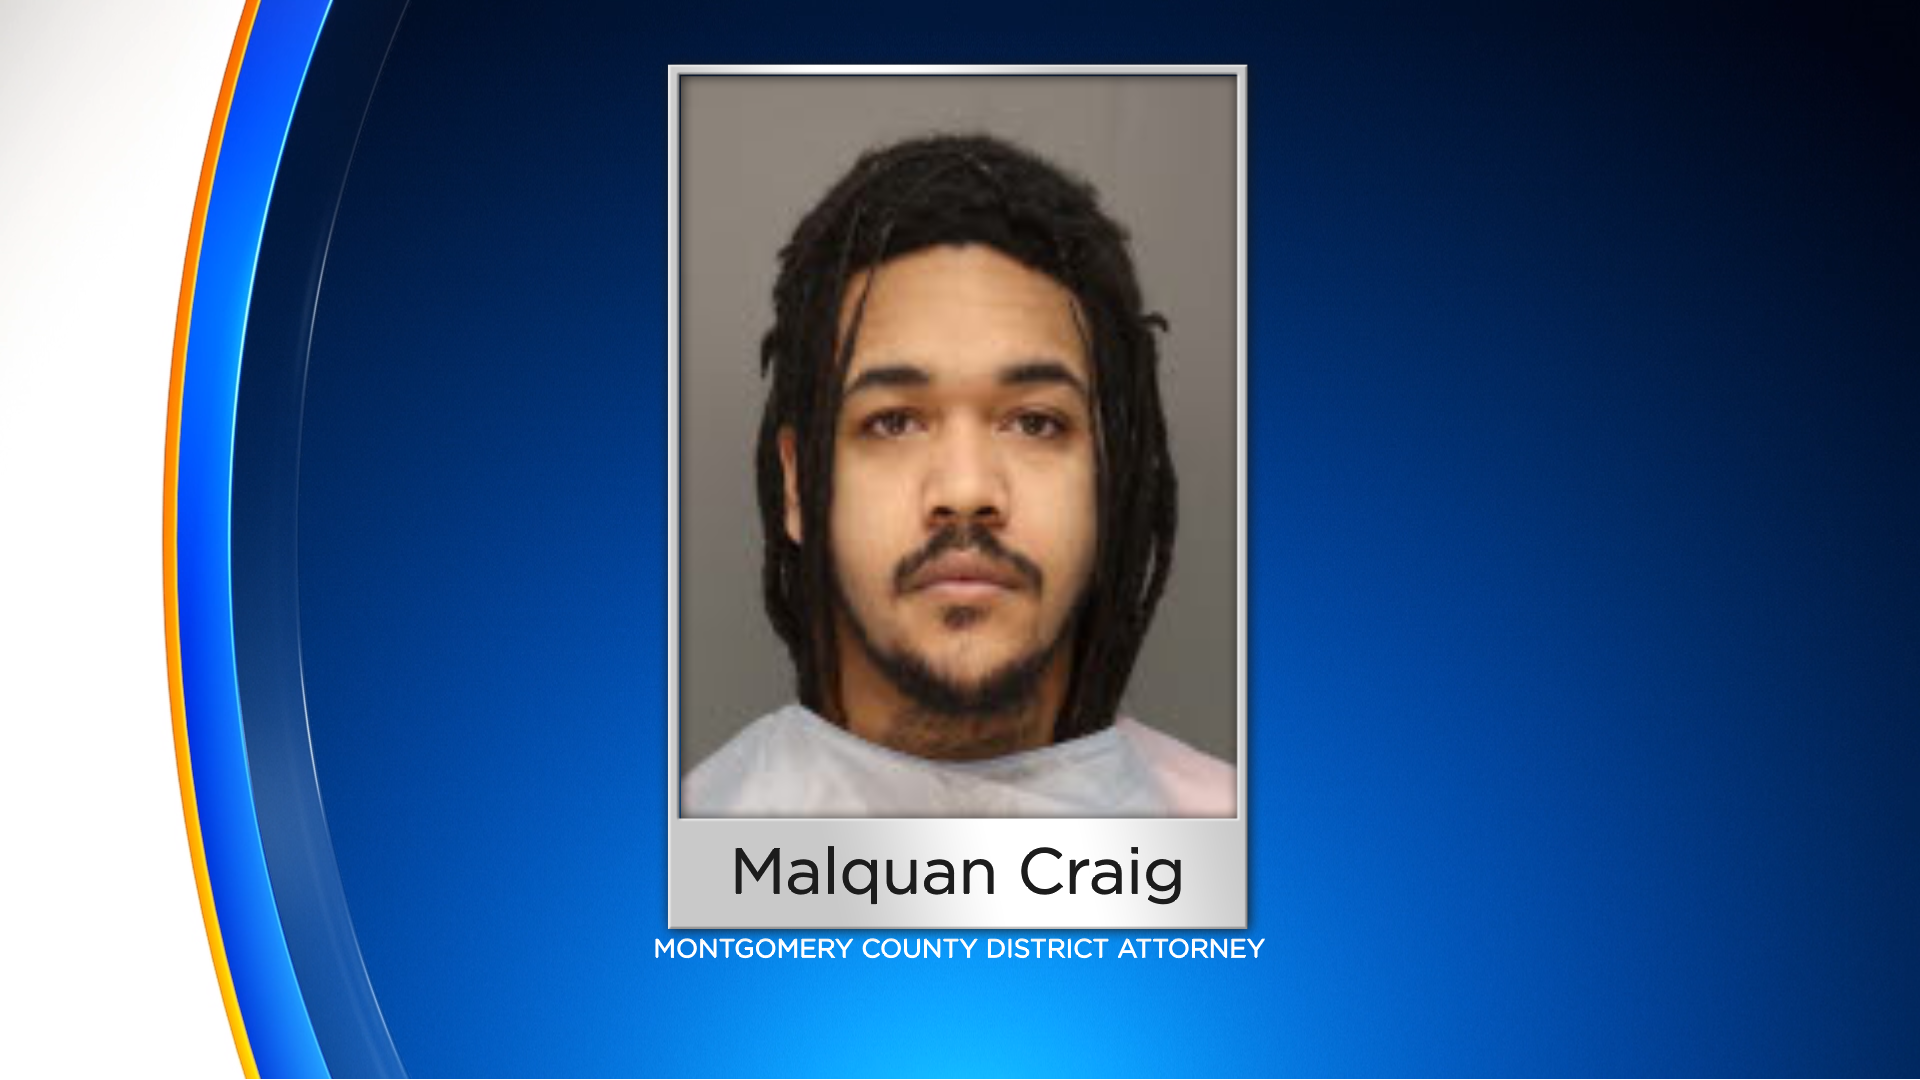 Lancaster Man Charged In Aggravated Indecent Sexual Assaults Of Differently Abled, Elderly Woman: Montgomery County DA